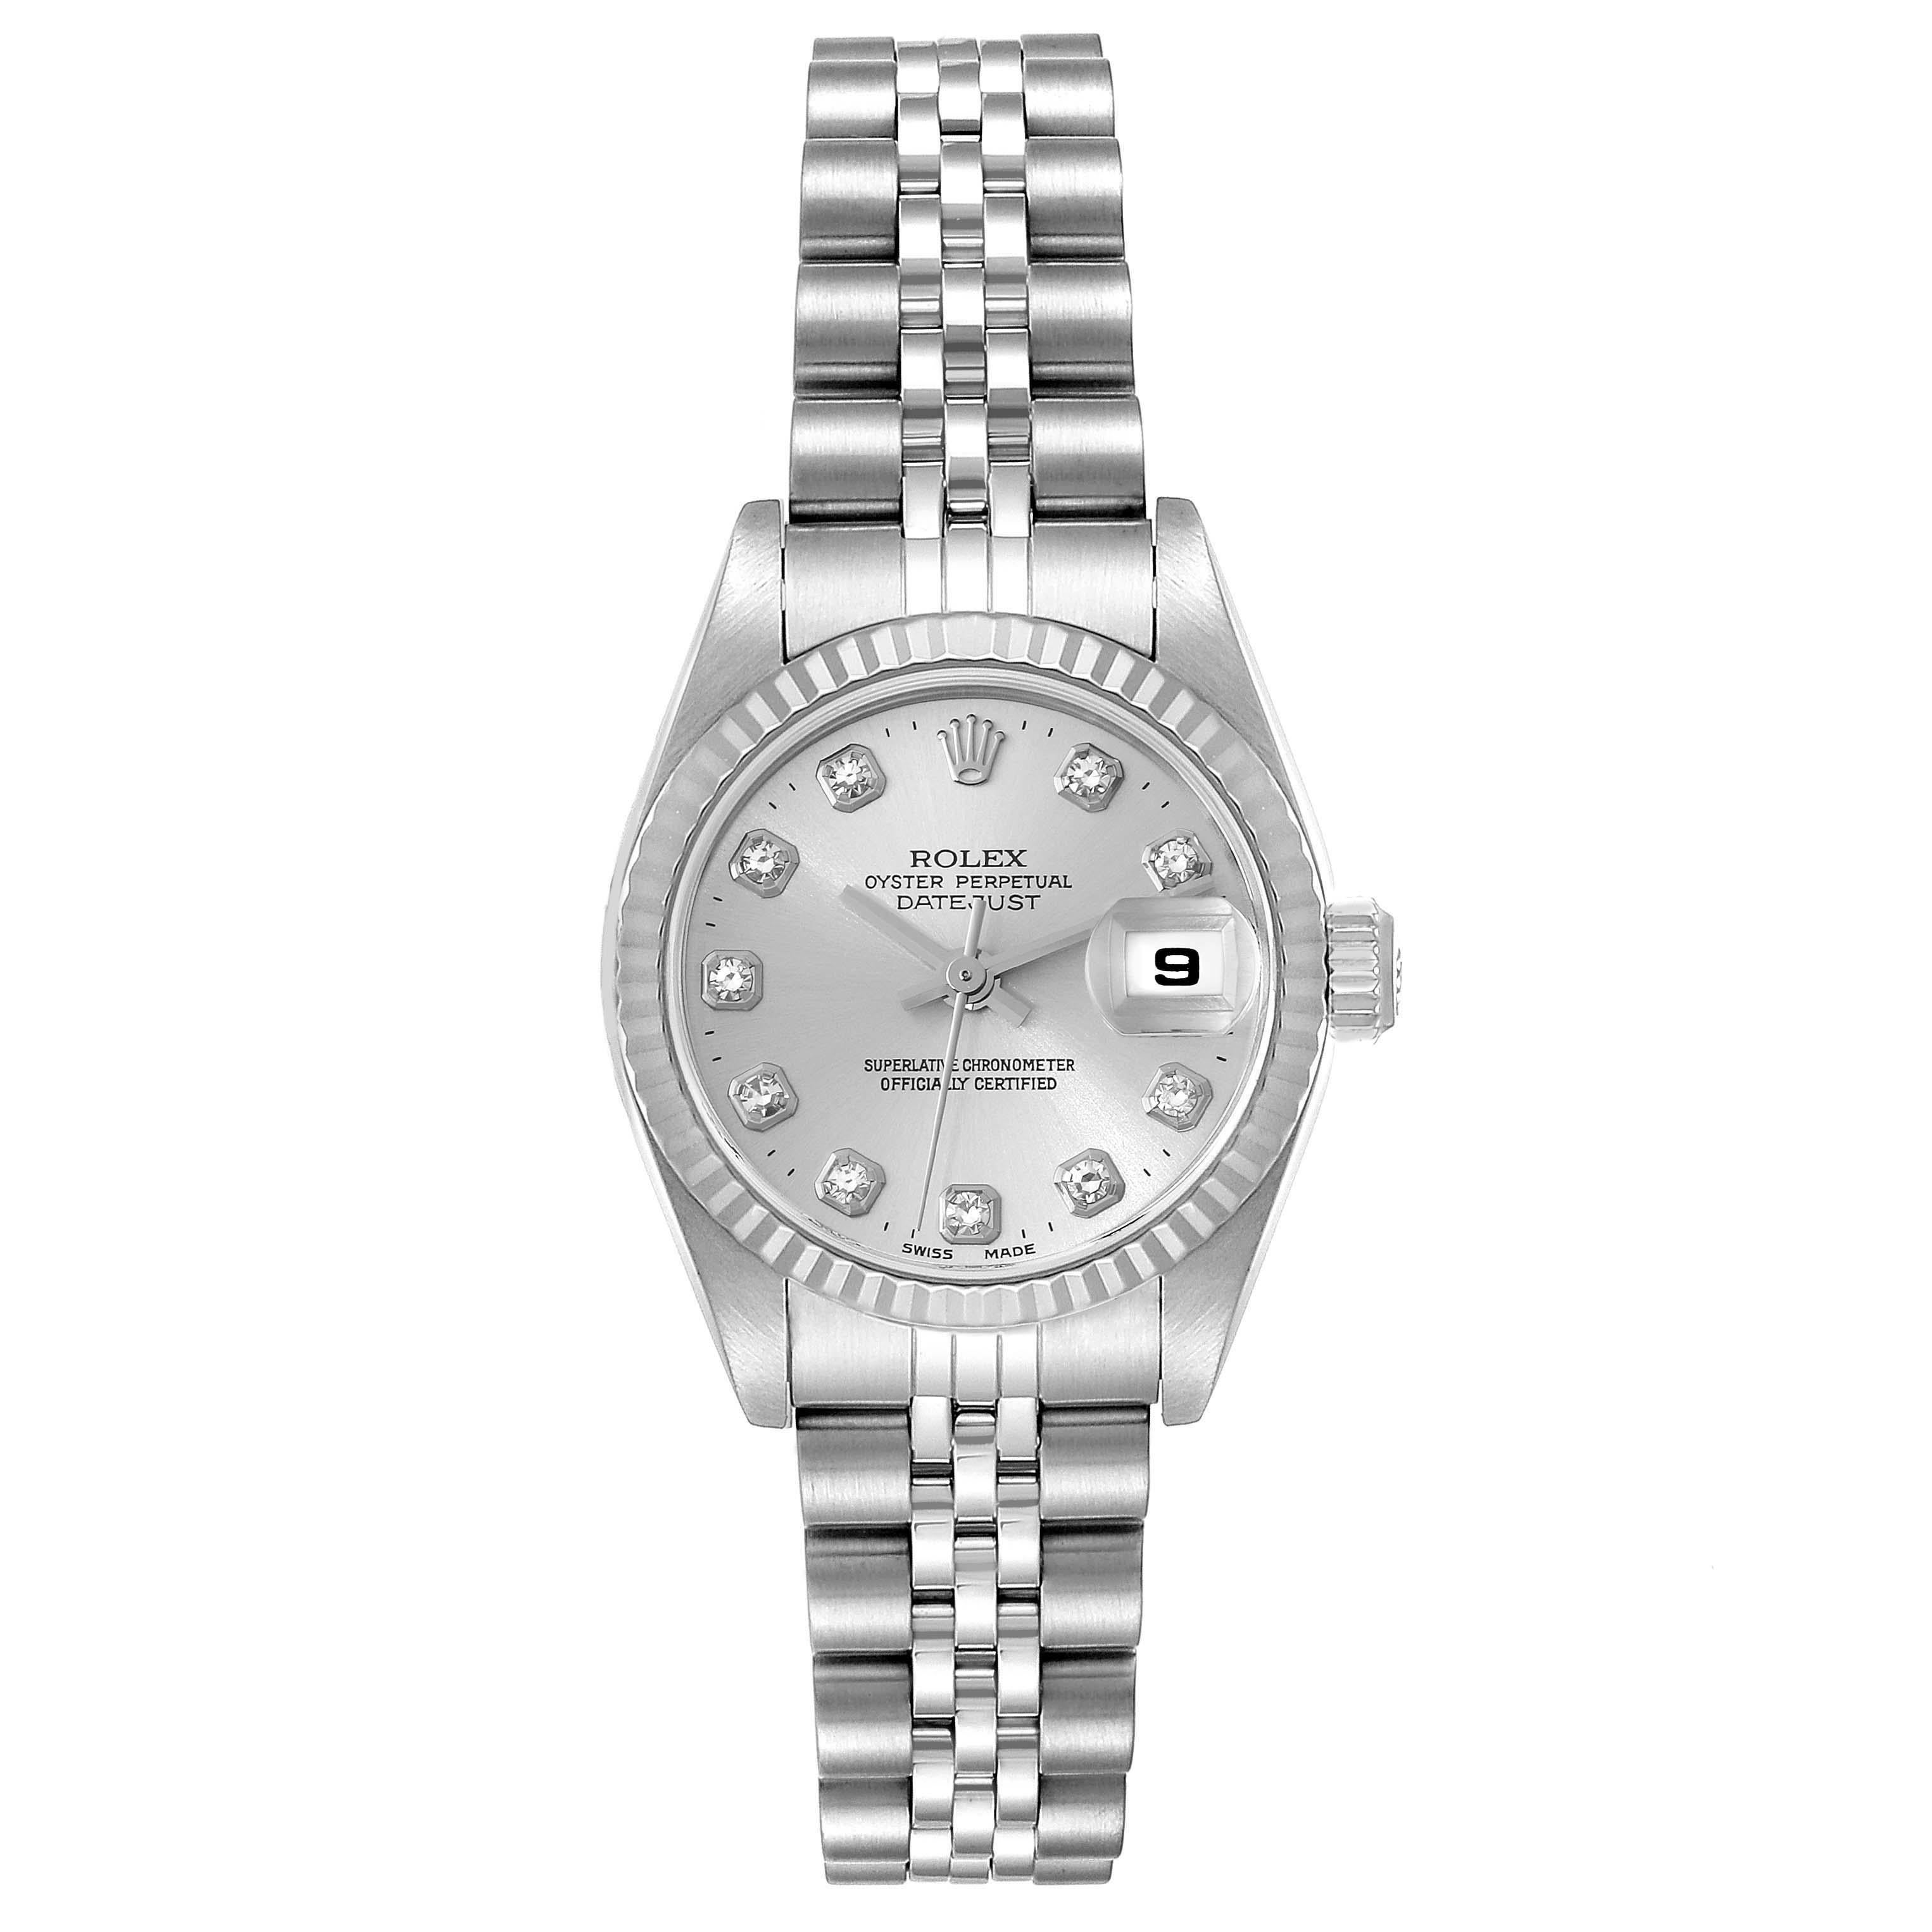 Rolex Datejust 26mm Silver Diamond Dial Steel Ladies Watch 79174. Officially certified chronometer automatic self-winding movement. Stainless steel oyster case 26.0 mm in diameter. Rolex logo on the crown. 18K white gold fluted bezel. Scratch